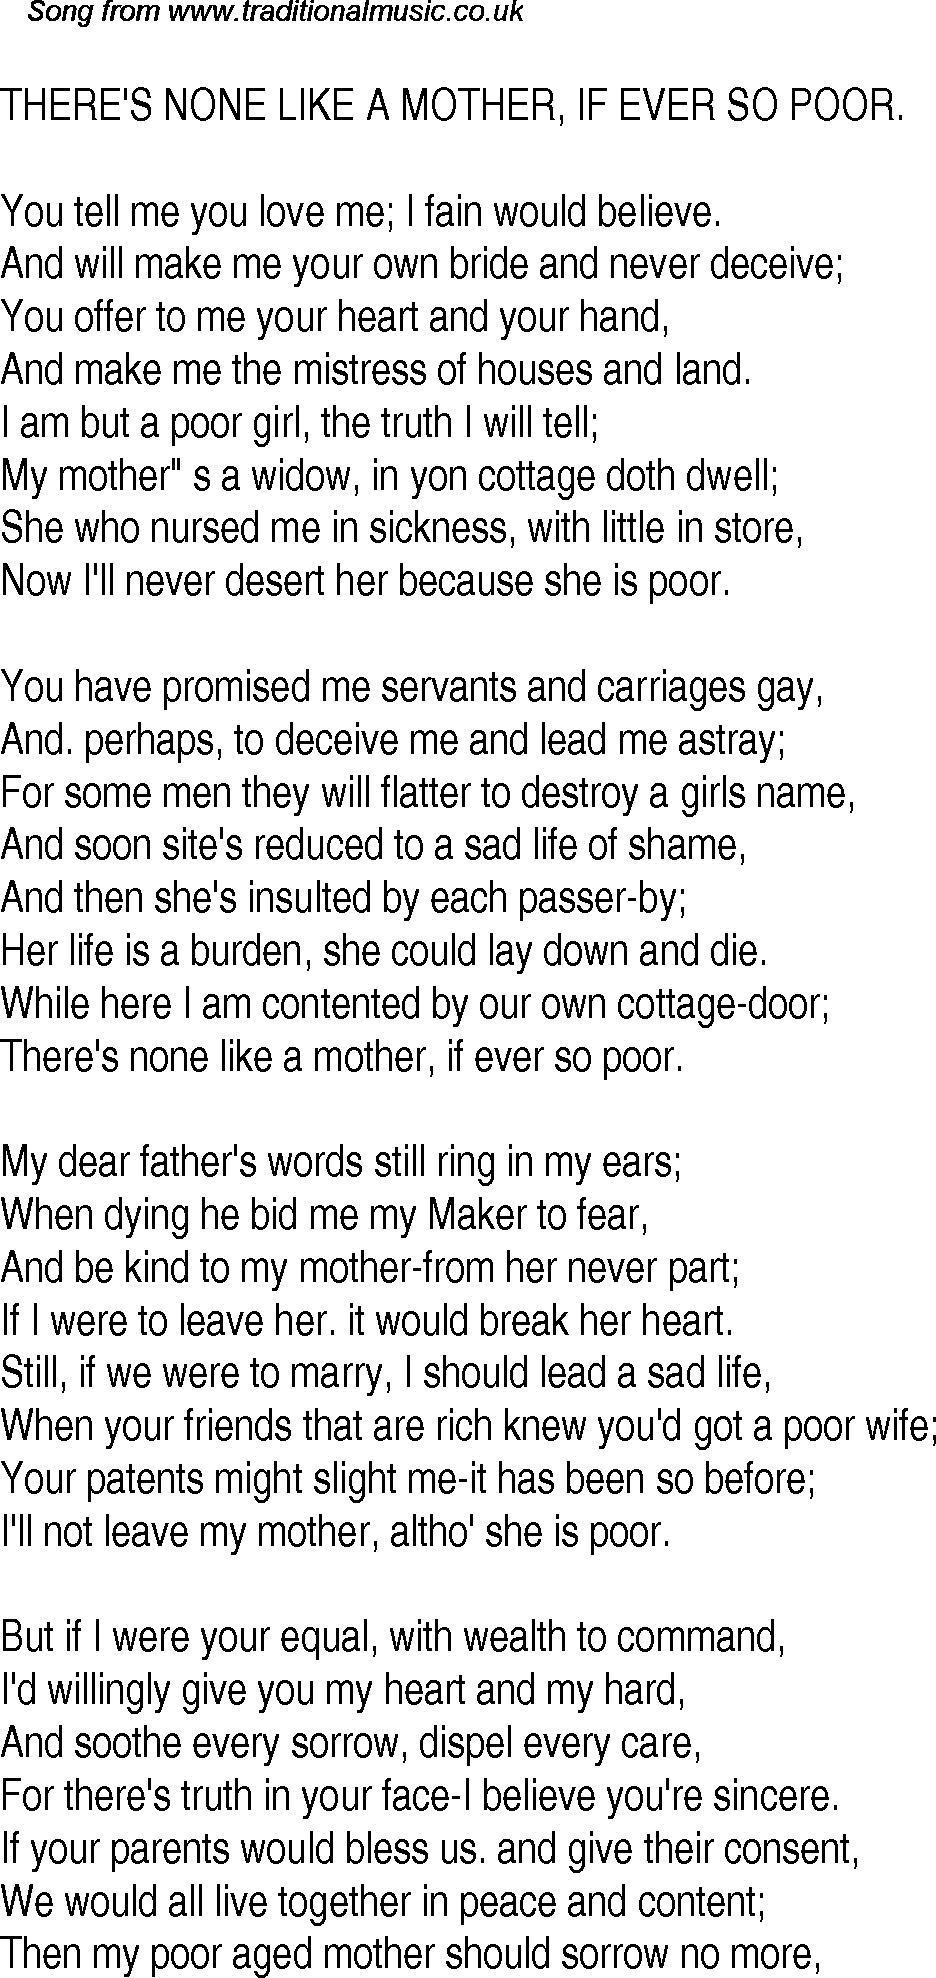 American old-time song lyrics for There's None Like A Mother, If Ever So Poor